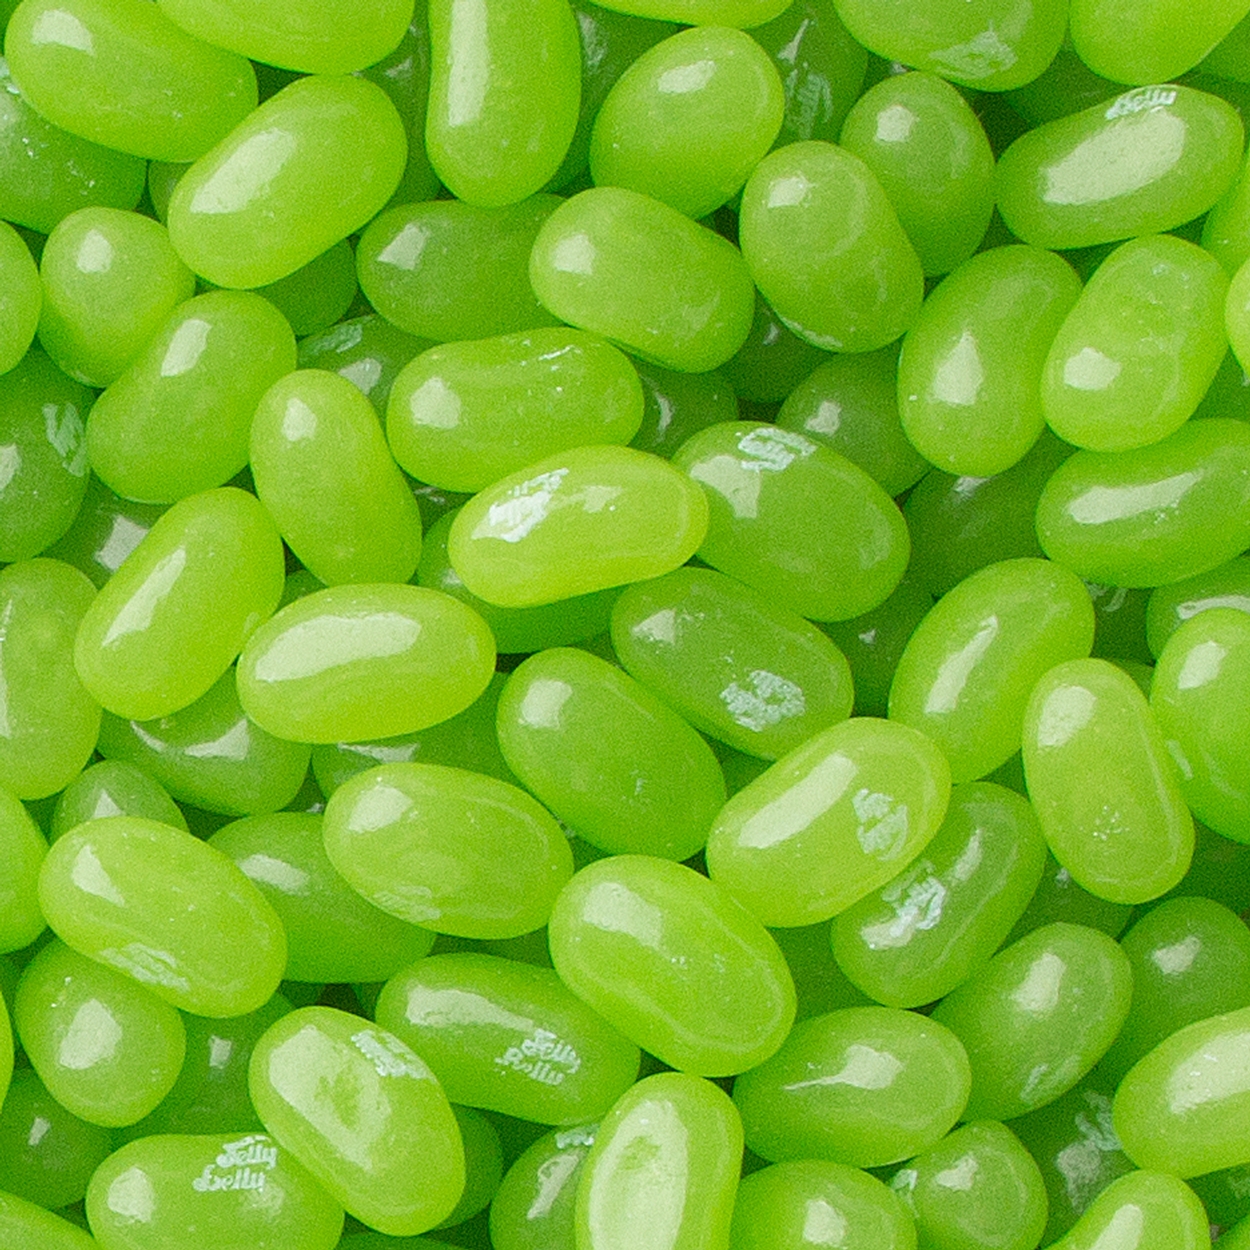 Candy Lime. Green Jelly Bean. Jelly belly Green. Zozole Painter Green Jelly. Green jelly